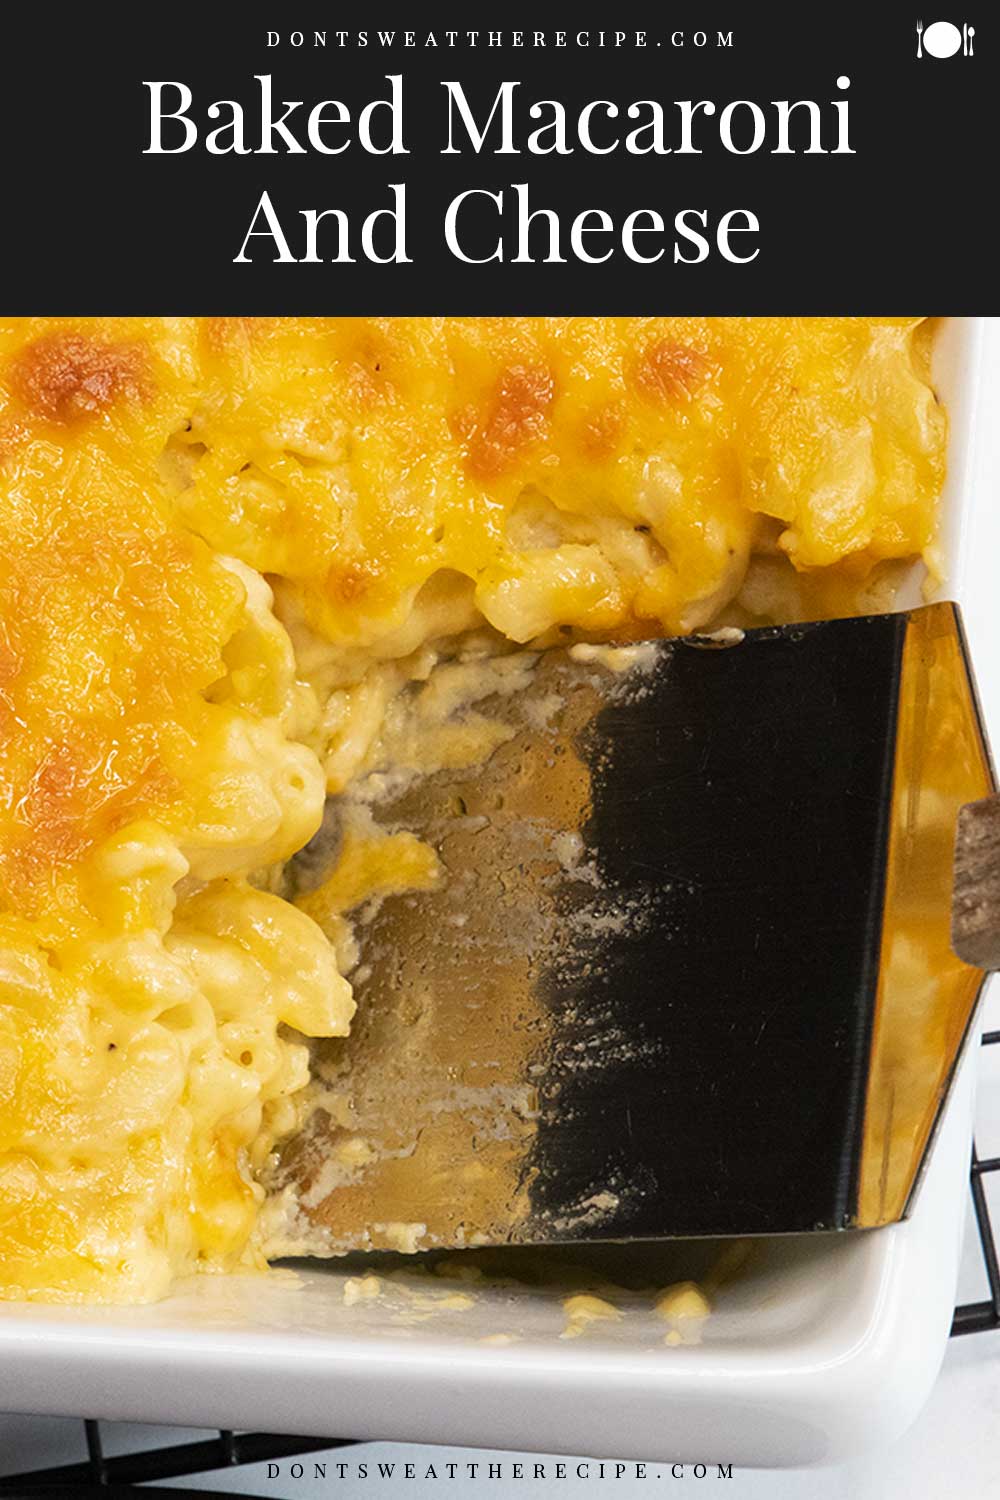 Baked Macaroni And Cheese - Don't Sweat The Recipe